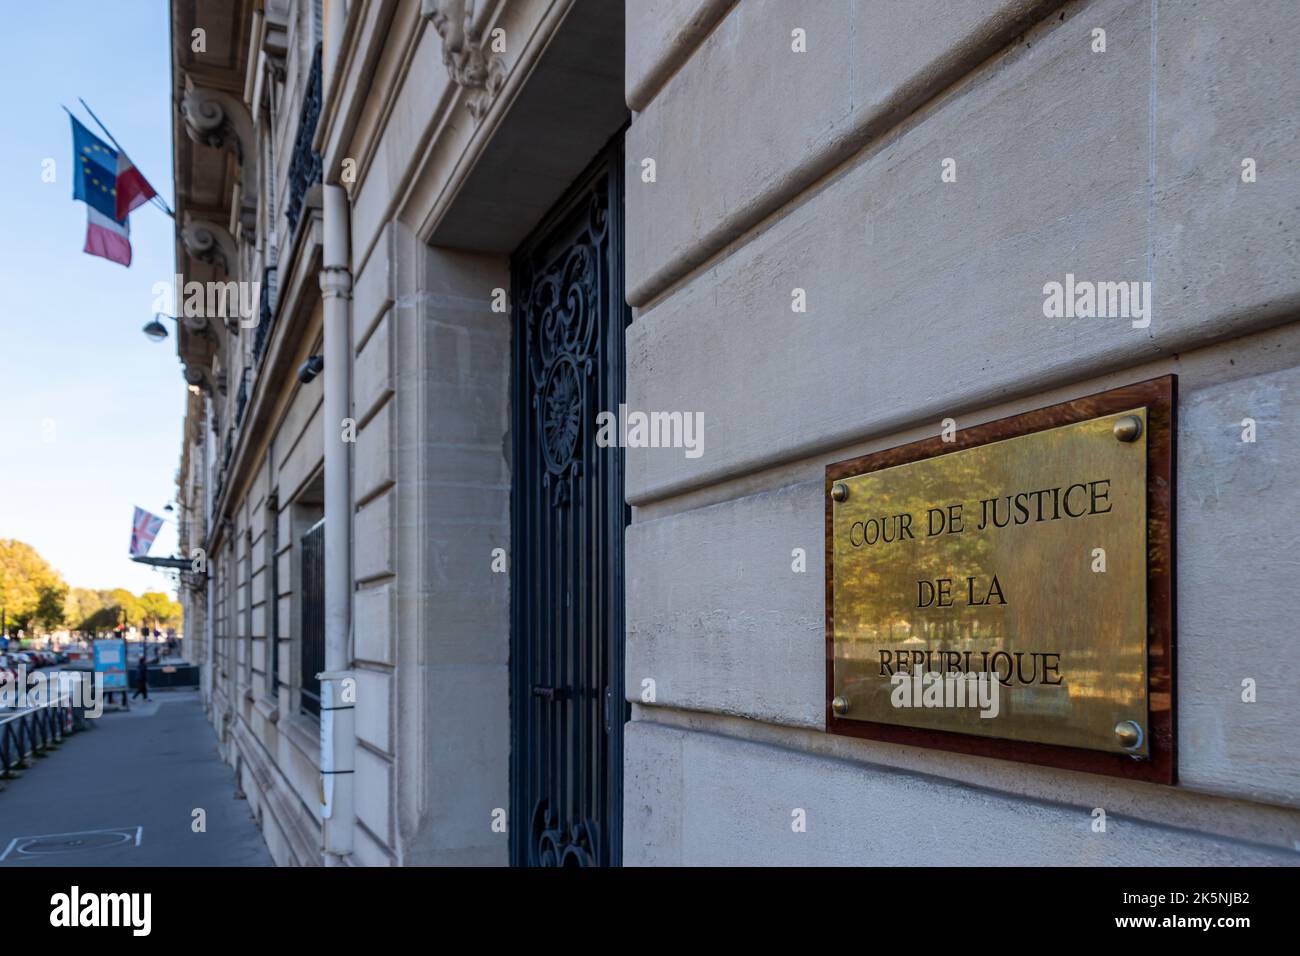 Entrance to the Cour de Justice de la République, a French jurisdiction competent to try crimes or misdemeanors committed by members of the government Stock Photo